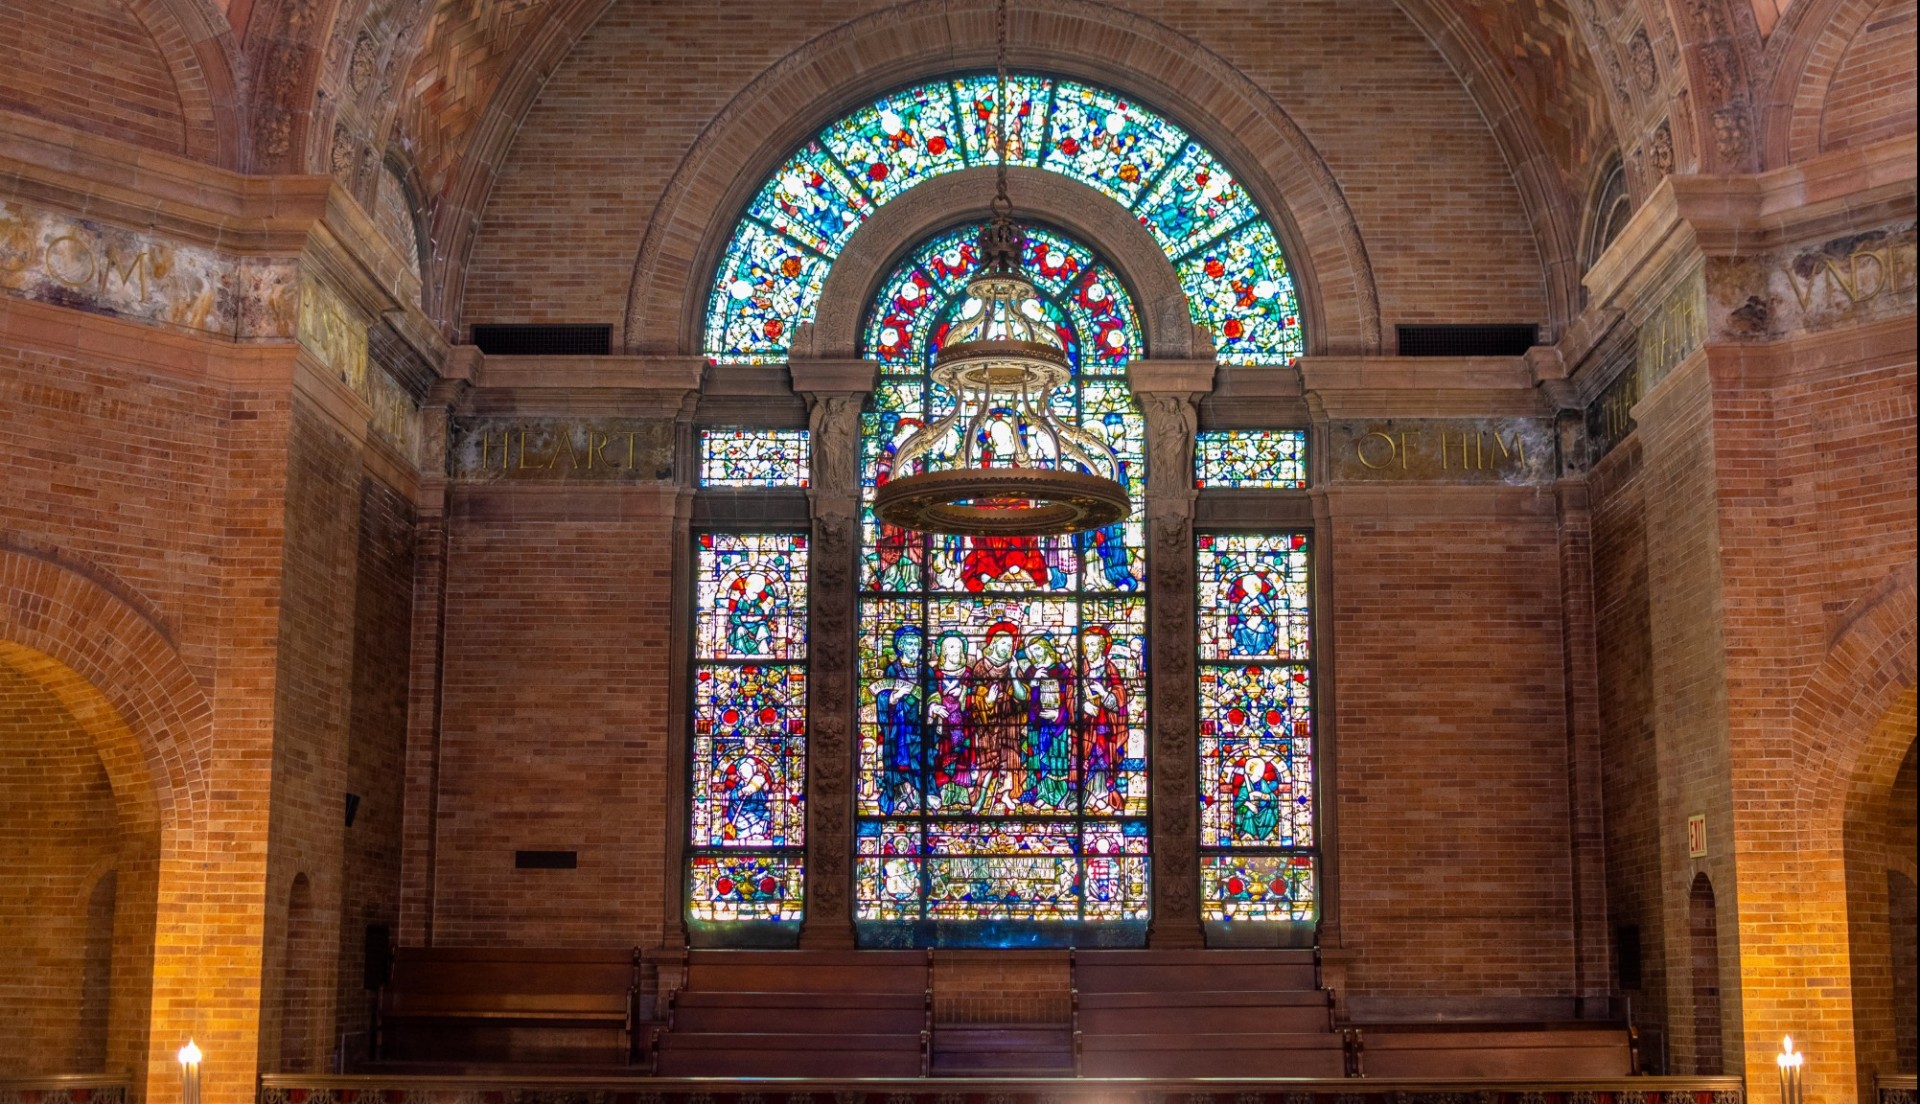 One of the magnificent stained glass windows of Saint Paul's Chapel.